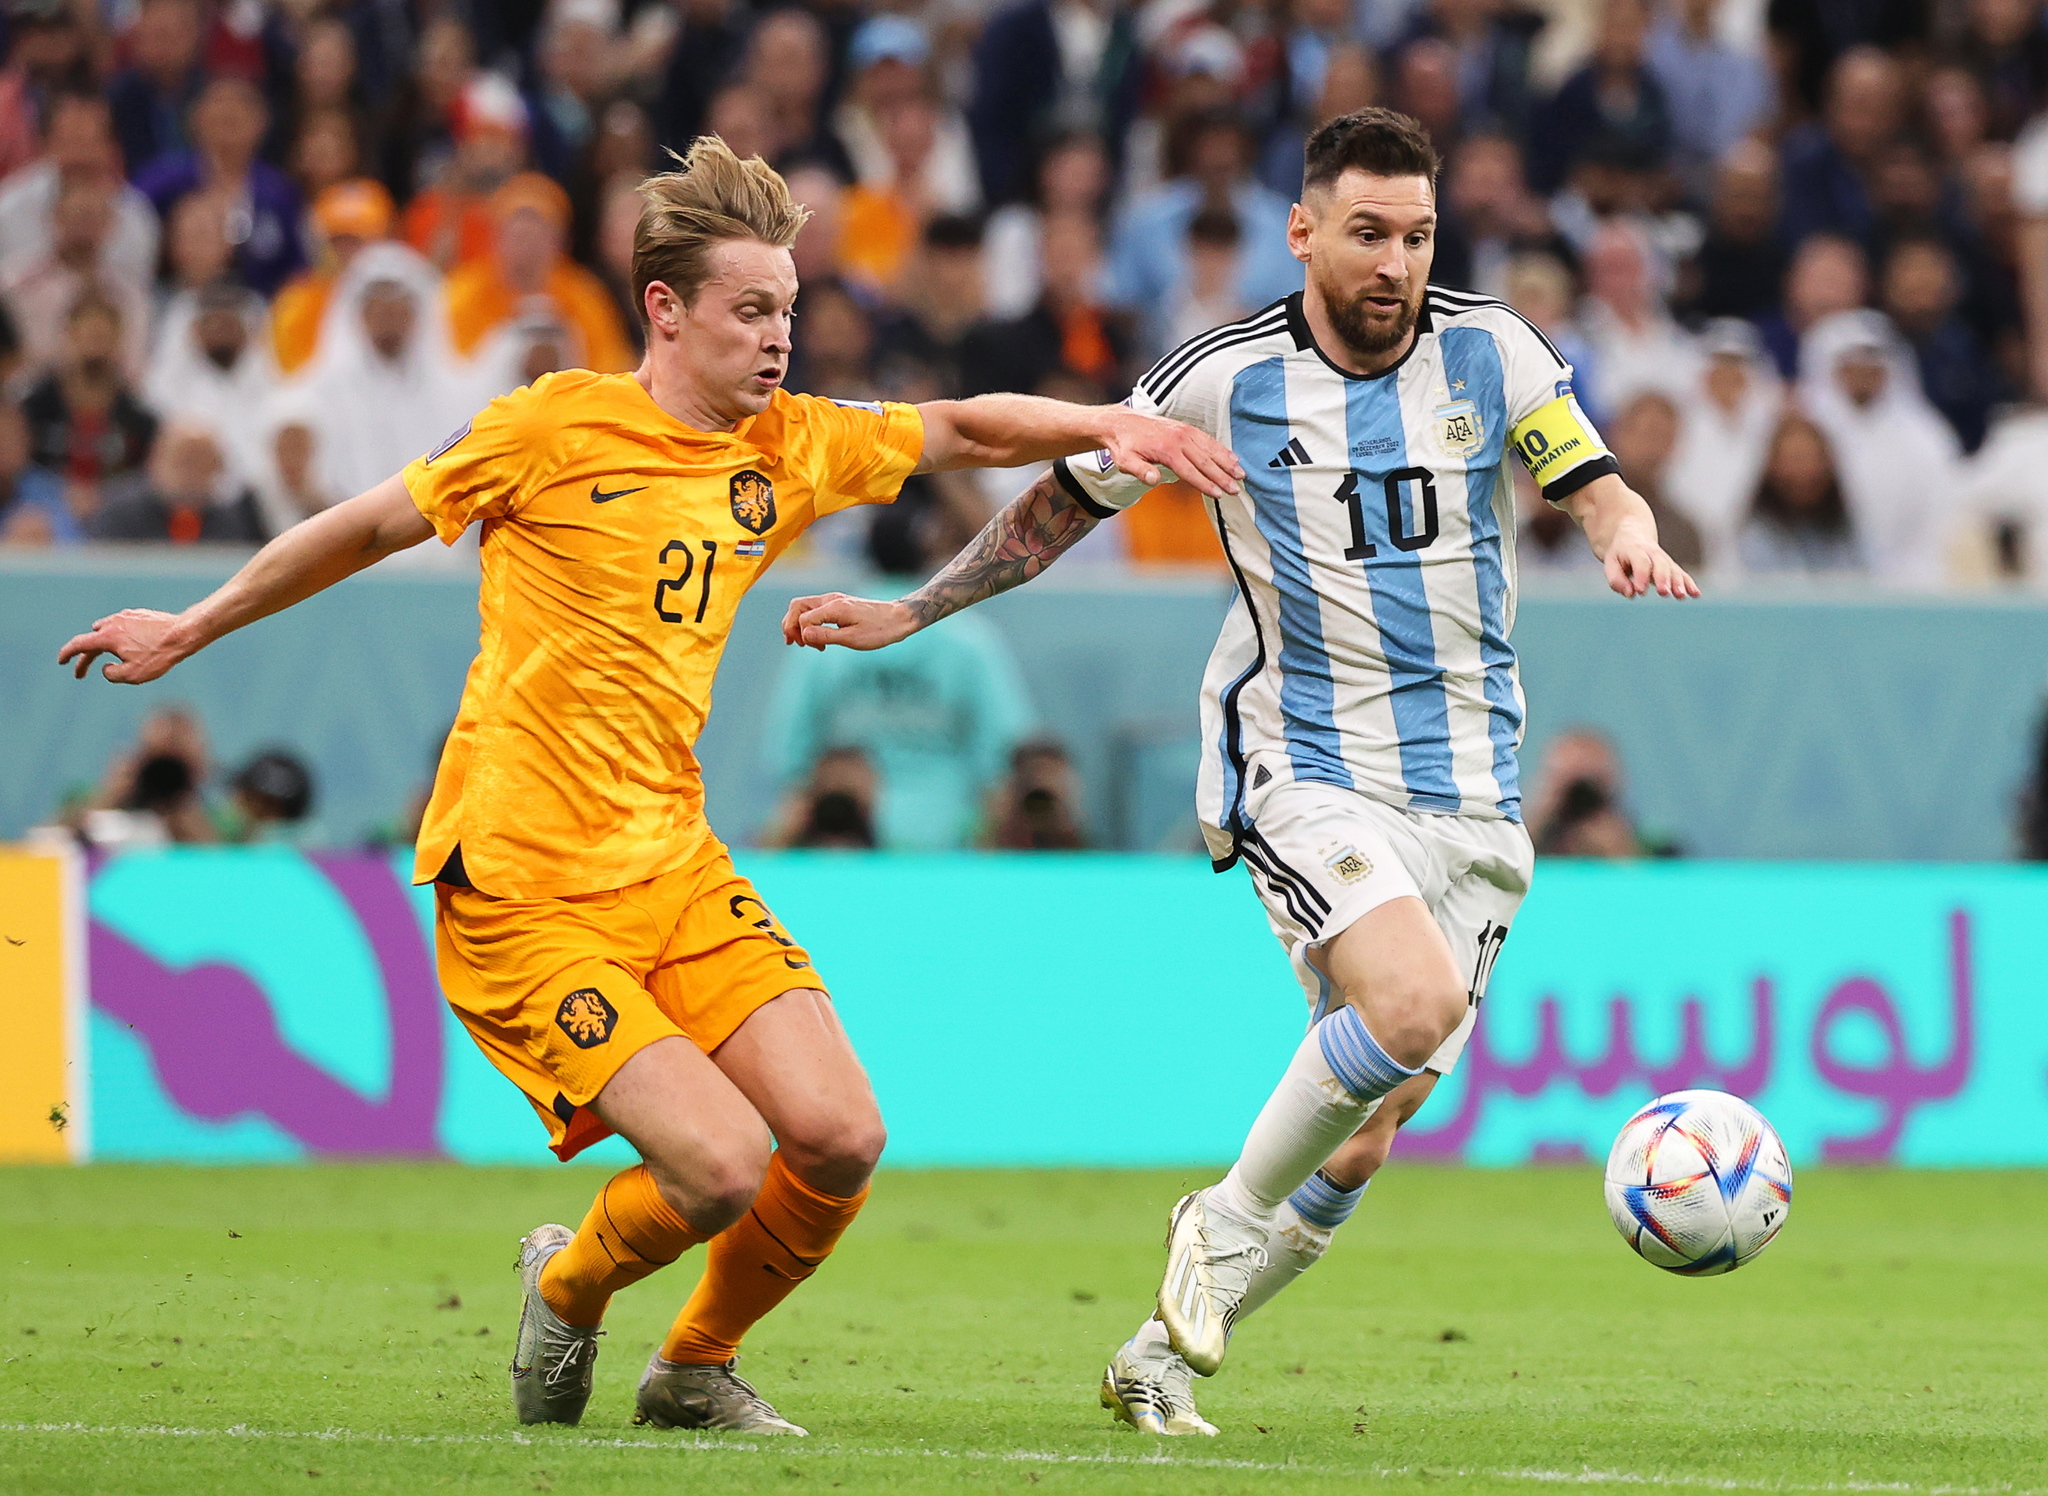 Lusail (Qatar), 09/12/2022.- Frenkie de Jong (L) of the Netherlands in action against Lionel Messi (R) of  lt;HIT gt;Argentina lt;/HIT gt; during the FIFA World Cup 2022 quarter final soccer match between the Netherlands and  lt;HIT gt;Argentina lt;/HIT gt; at Lusail Stadium in Lusail, Qatar, 09 December 2022. (Mundial de Fútbol, Países Bajos; Holanda, Estados Unidos, Catar) EFE/EPA/Mohamed Messara